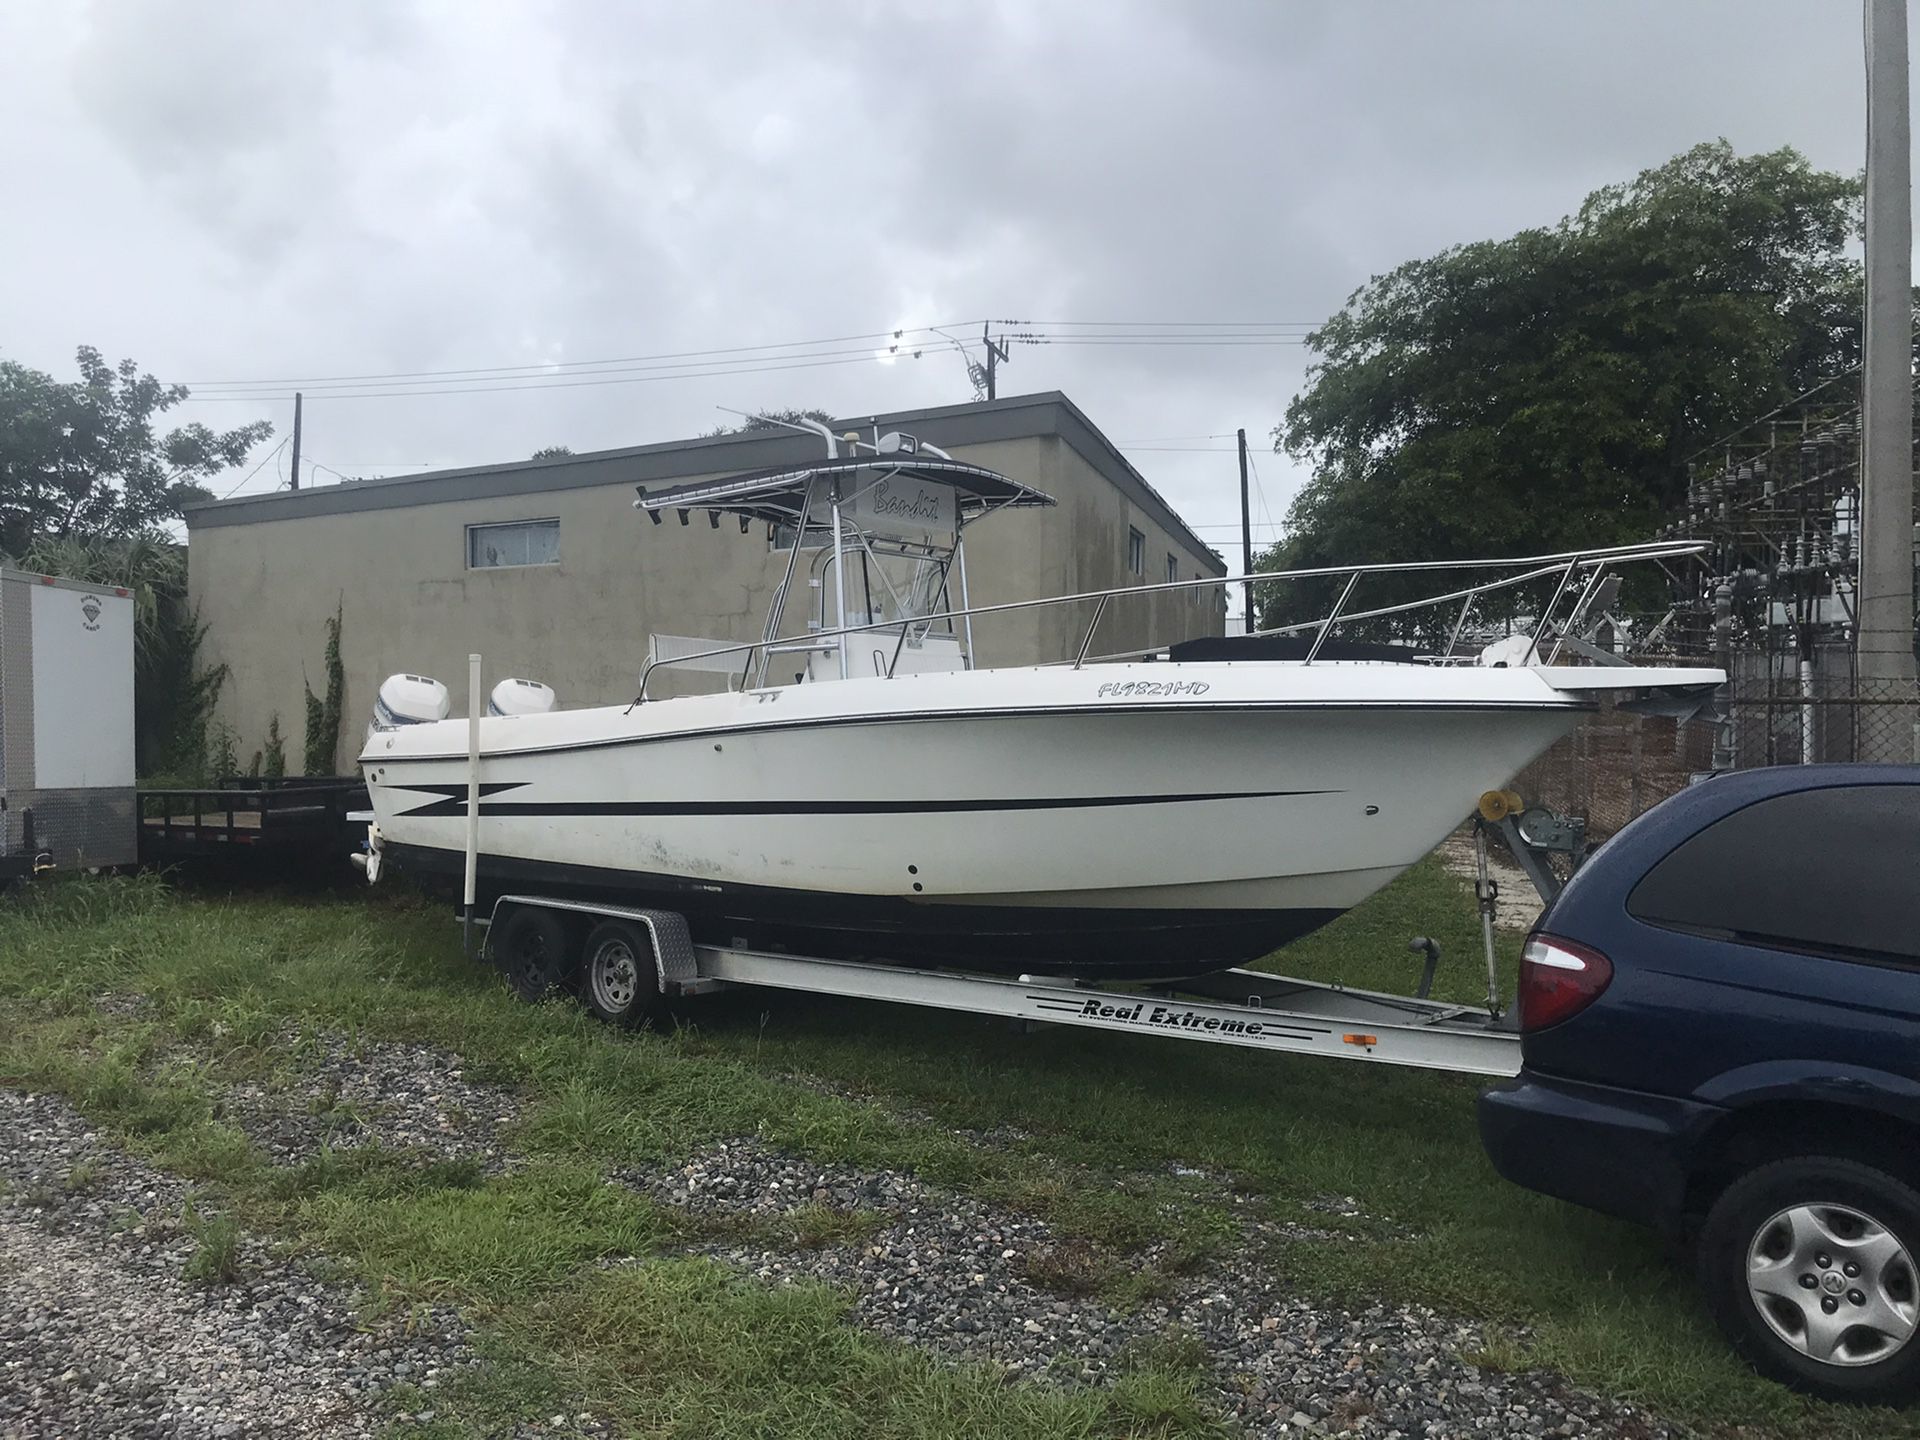 1994 Hydra Sports 25’5” With Twin Evinrude 200 HP Oceanpros, Aluminum Tandem Axle Trailer